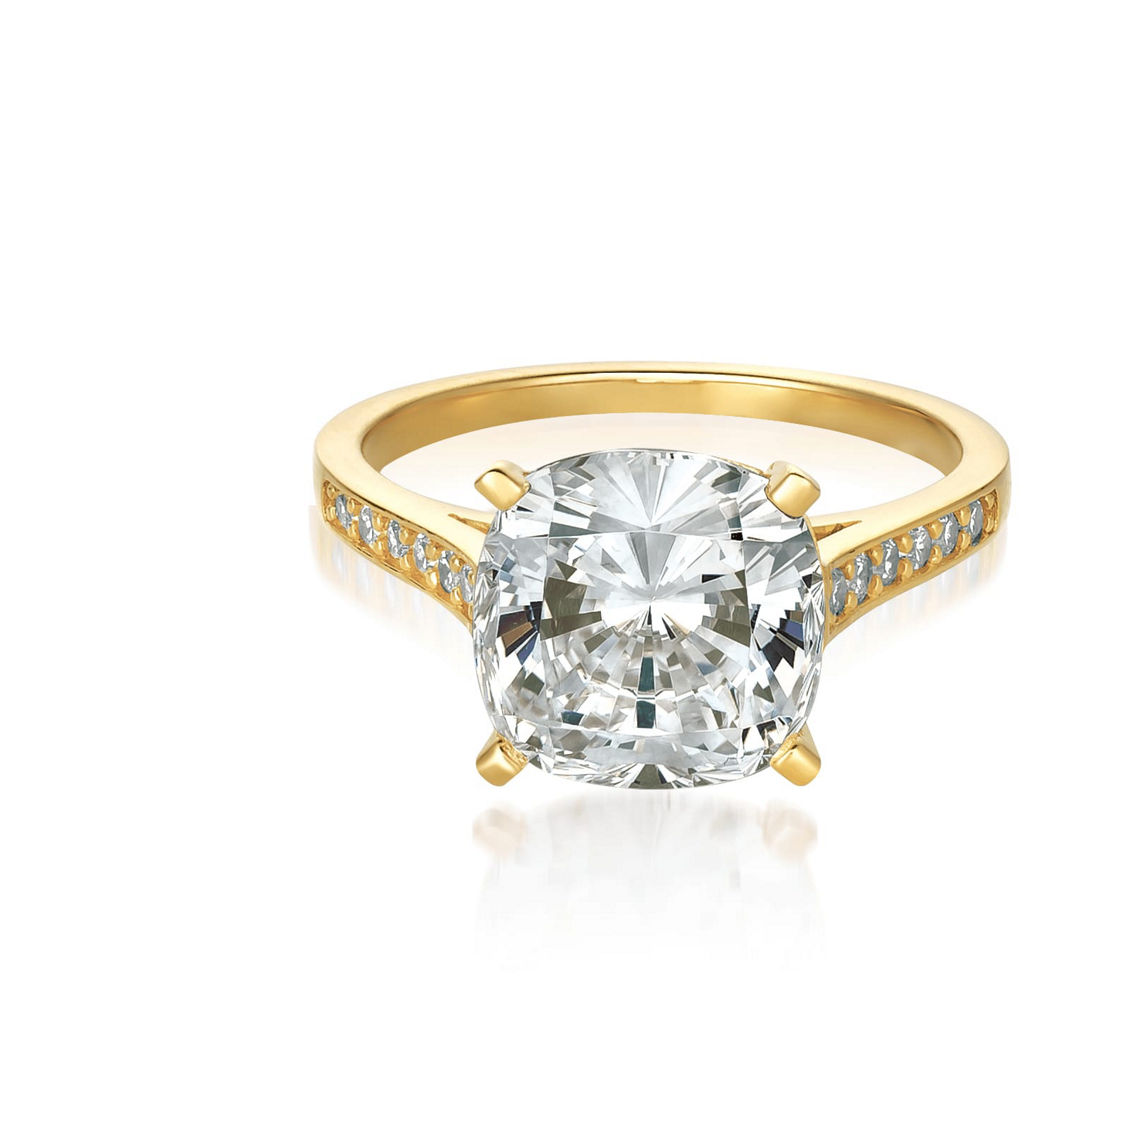 Crislu bliss cushion cut ring finished in 18kt yellow gold - Image 2 of 2